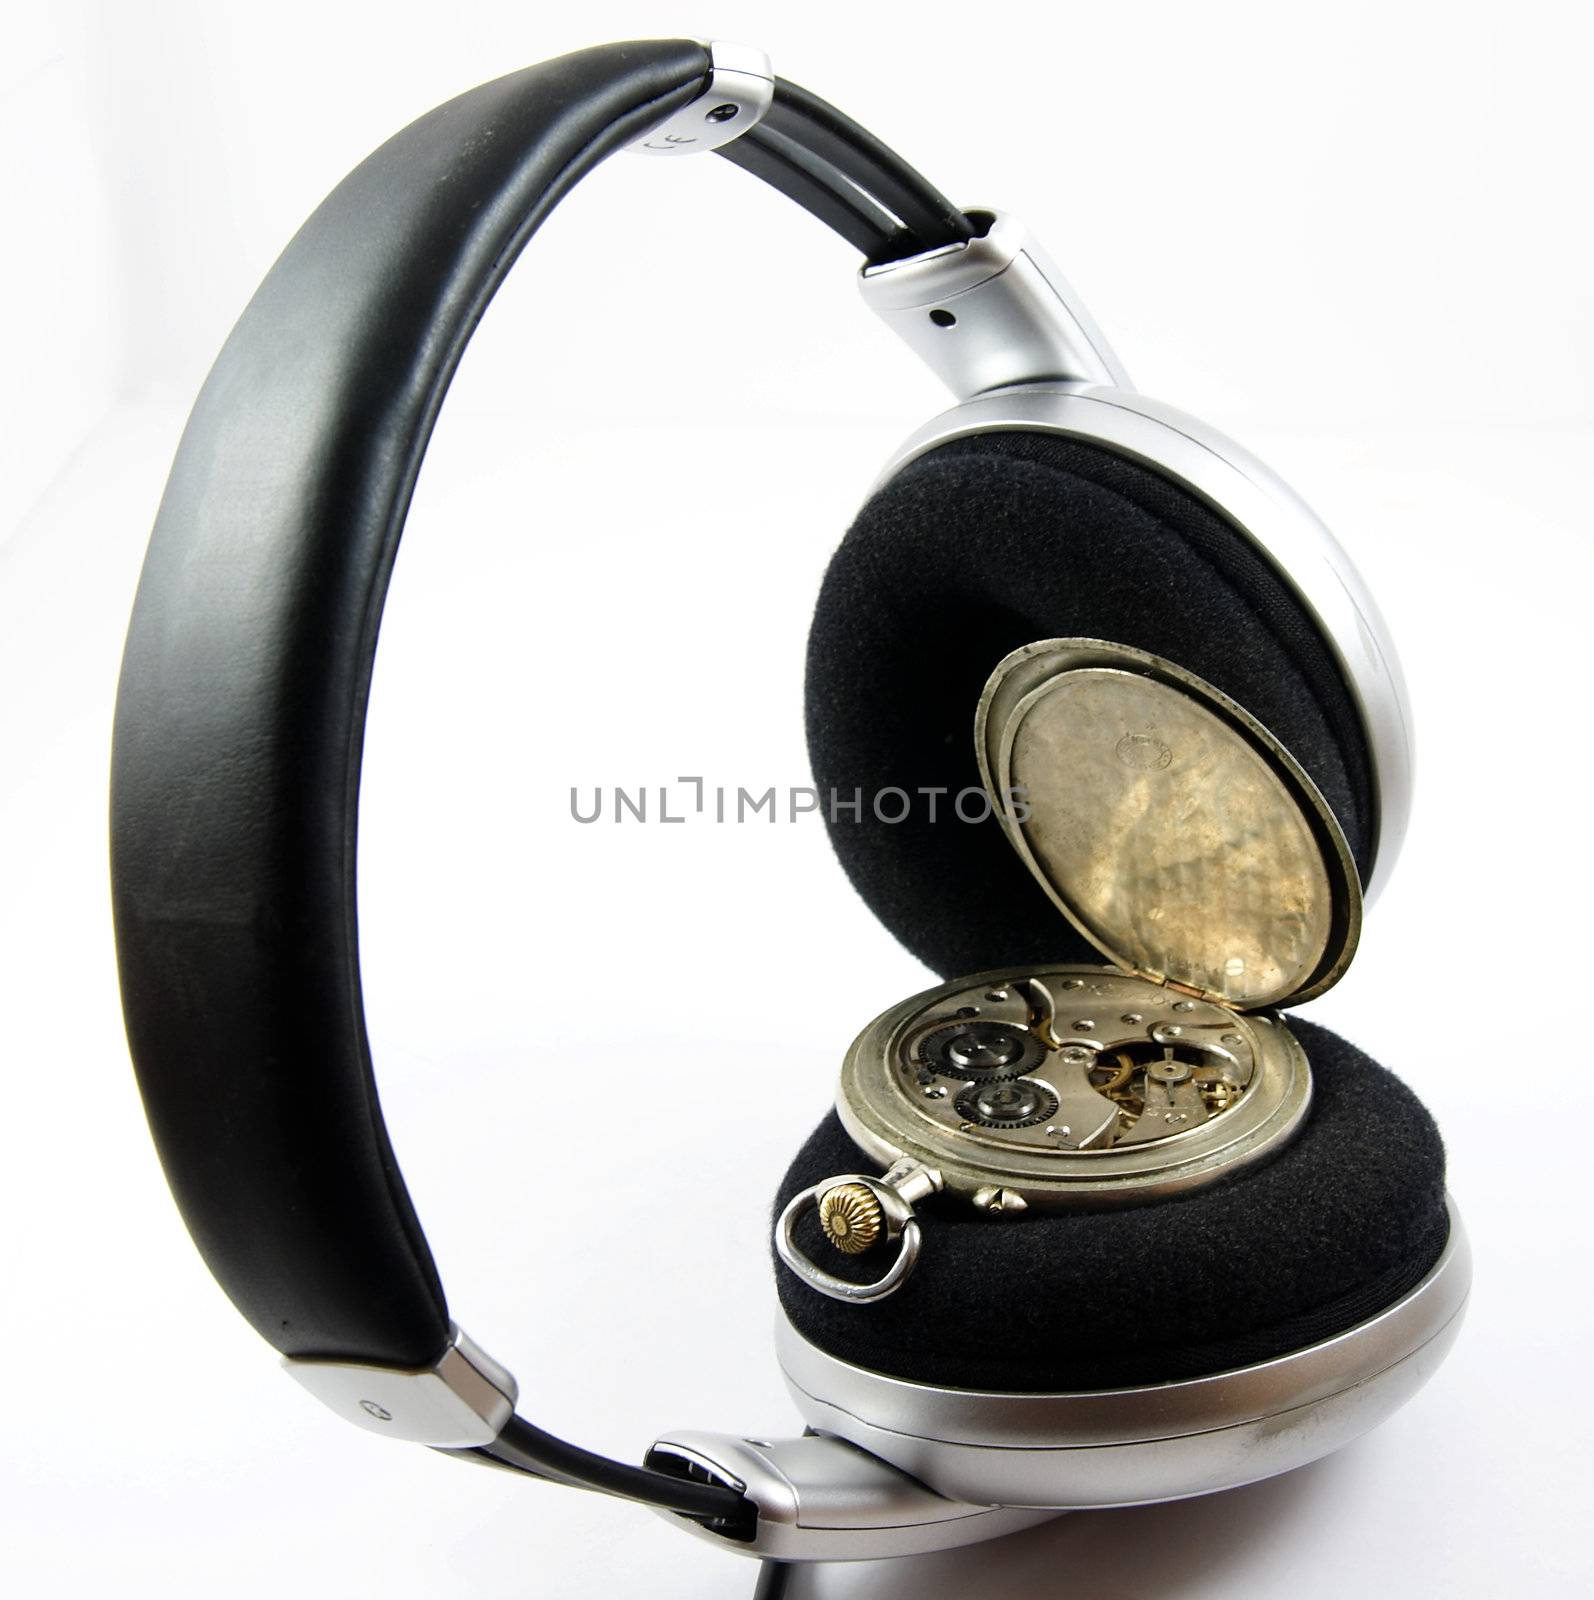 To hear time's melody. Old silver pocket watch in headphones isolated over white background.